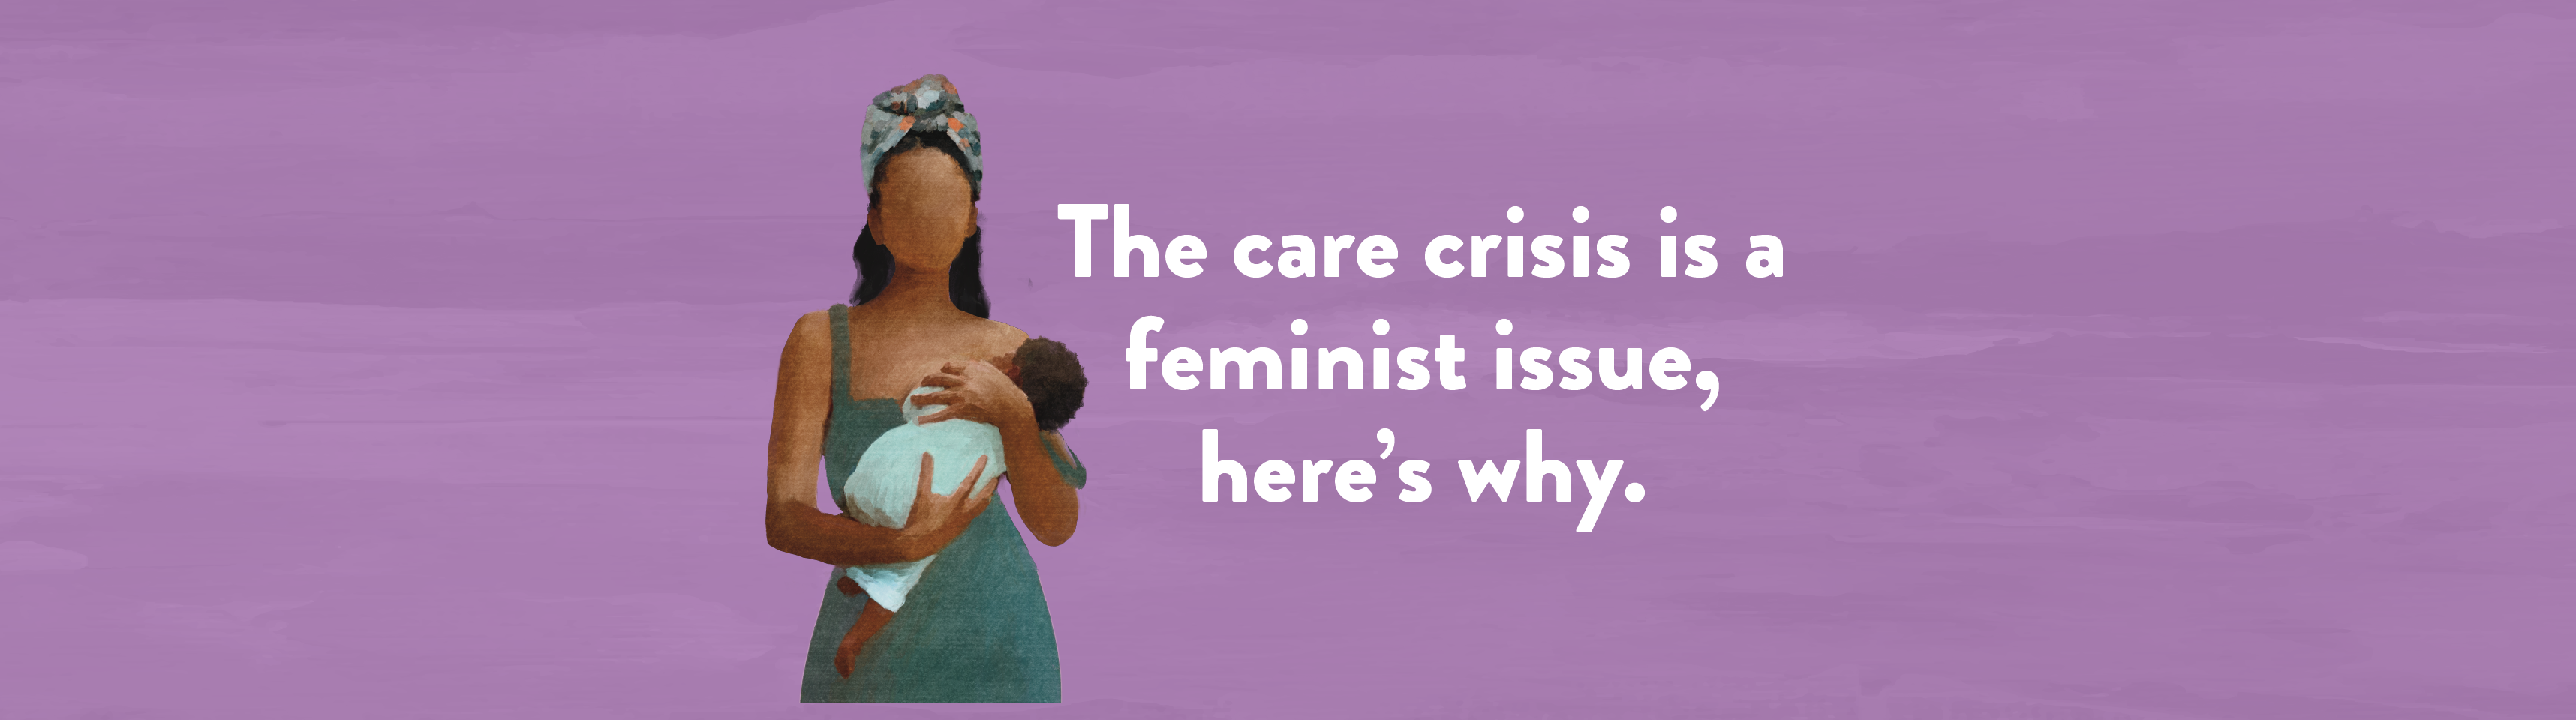 The care crisis is a feminist issue, here’s why.